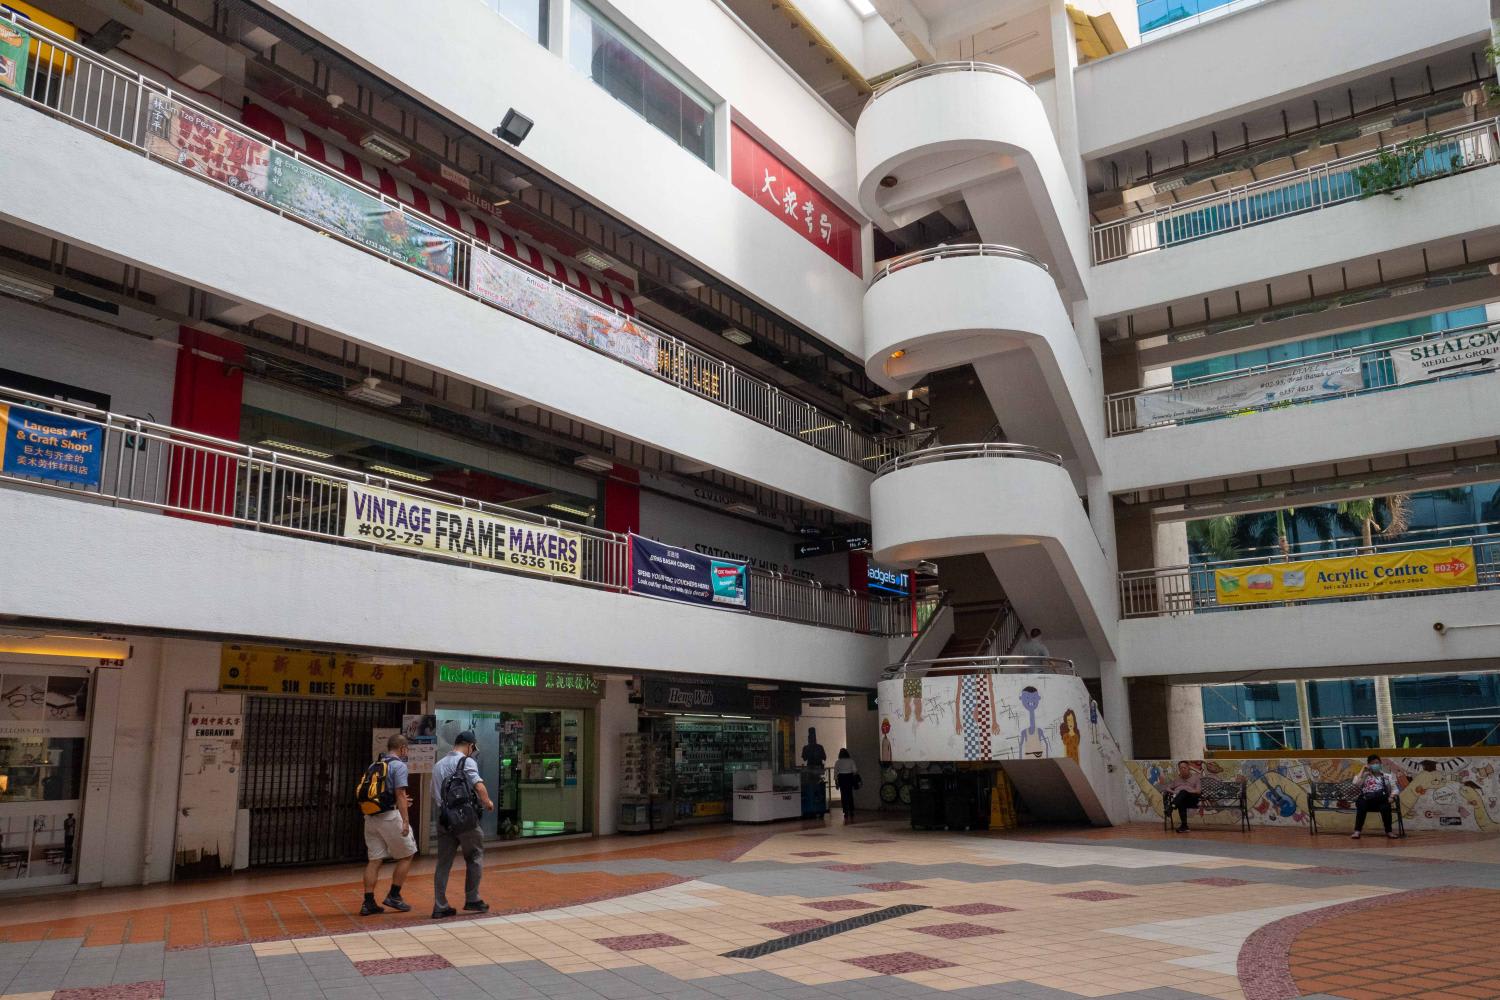 Breathing new life into the 'city of books': Tenants seek to rejuvenate Bras Basah Complex even as some bookshops falter